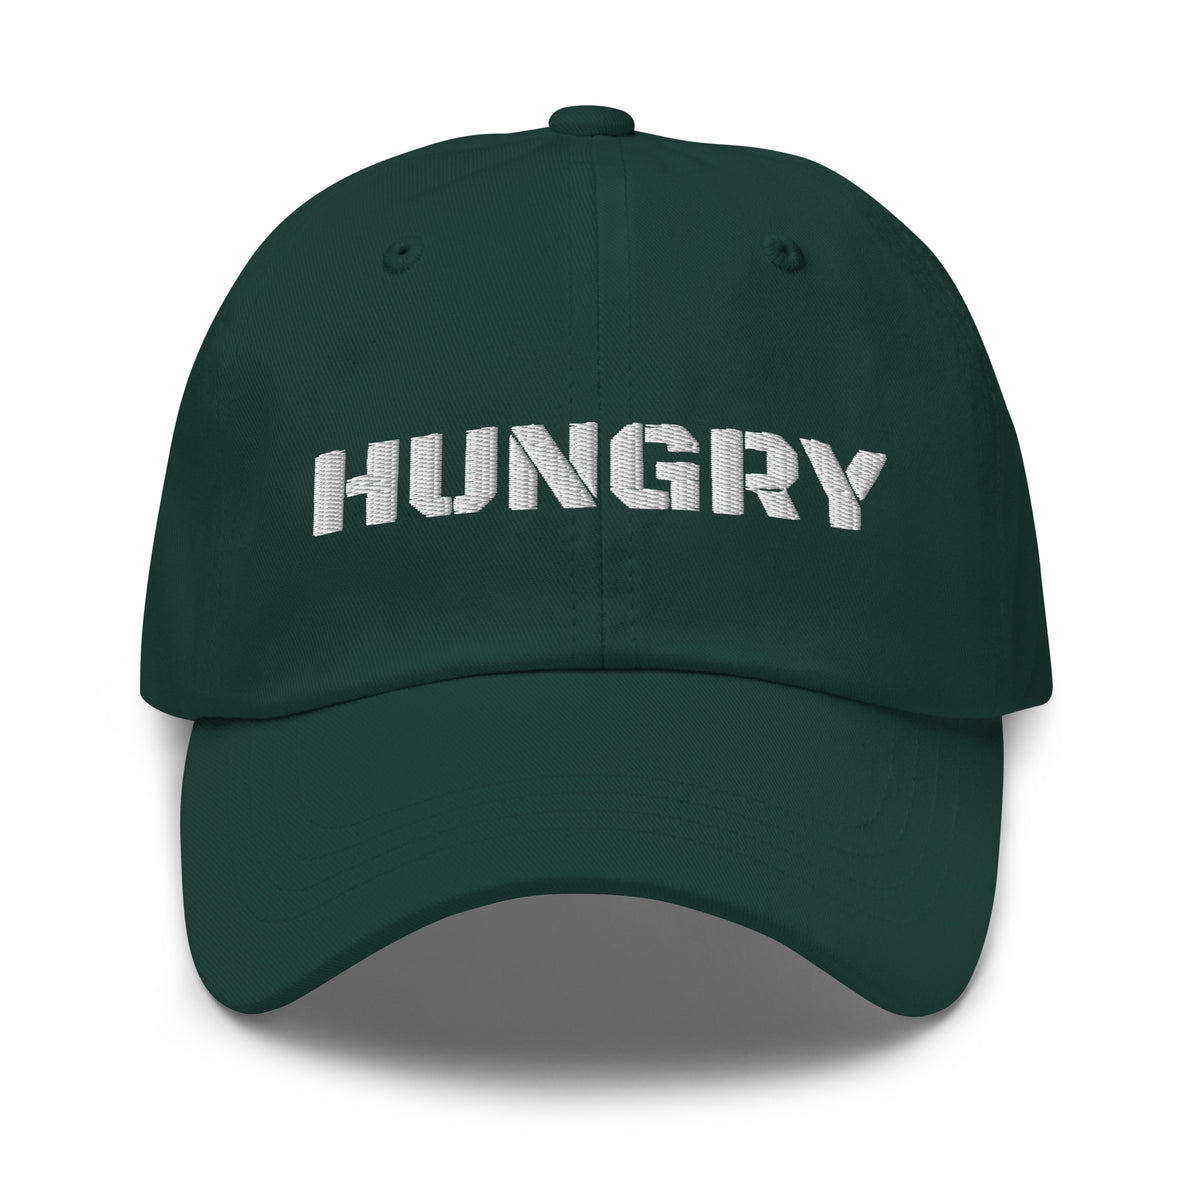 Hungry Embroidered Cap - Ball Cap - Twisted Jezebel